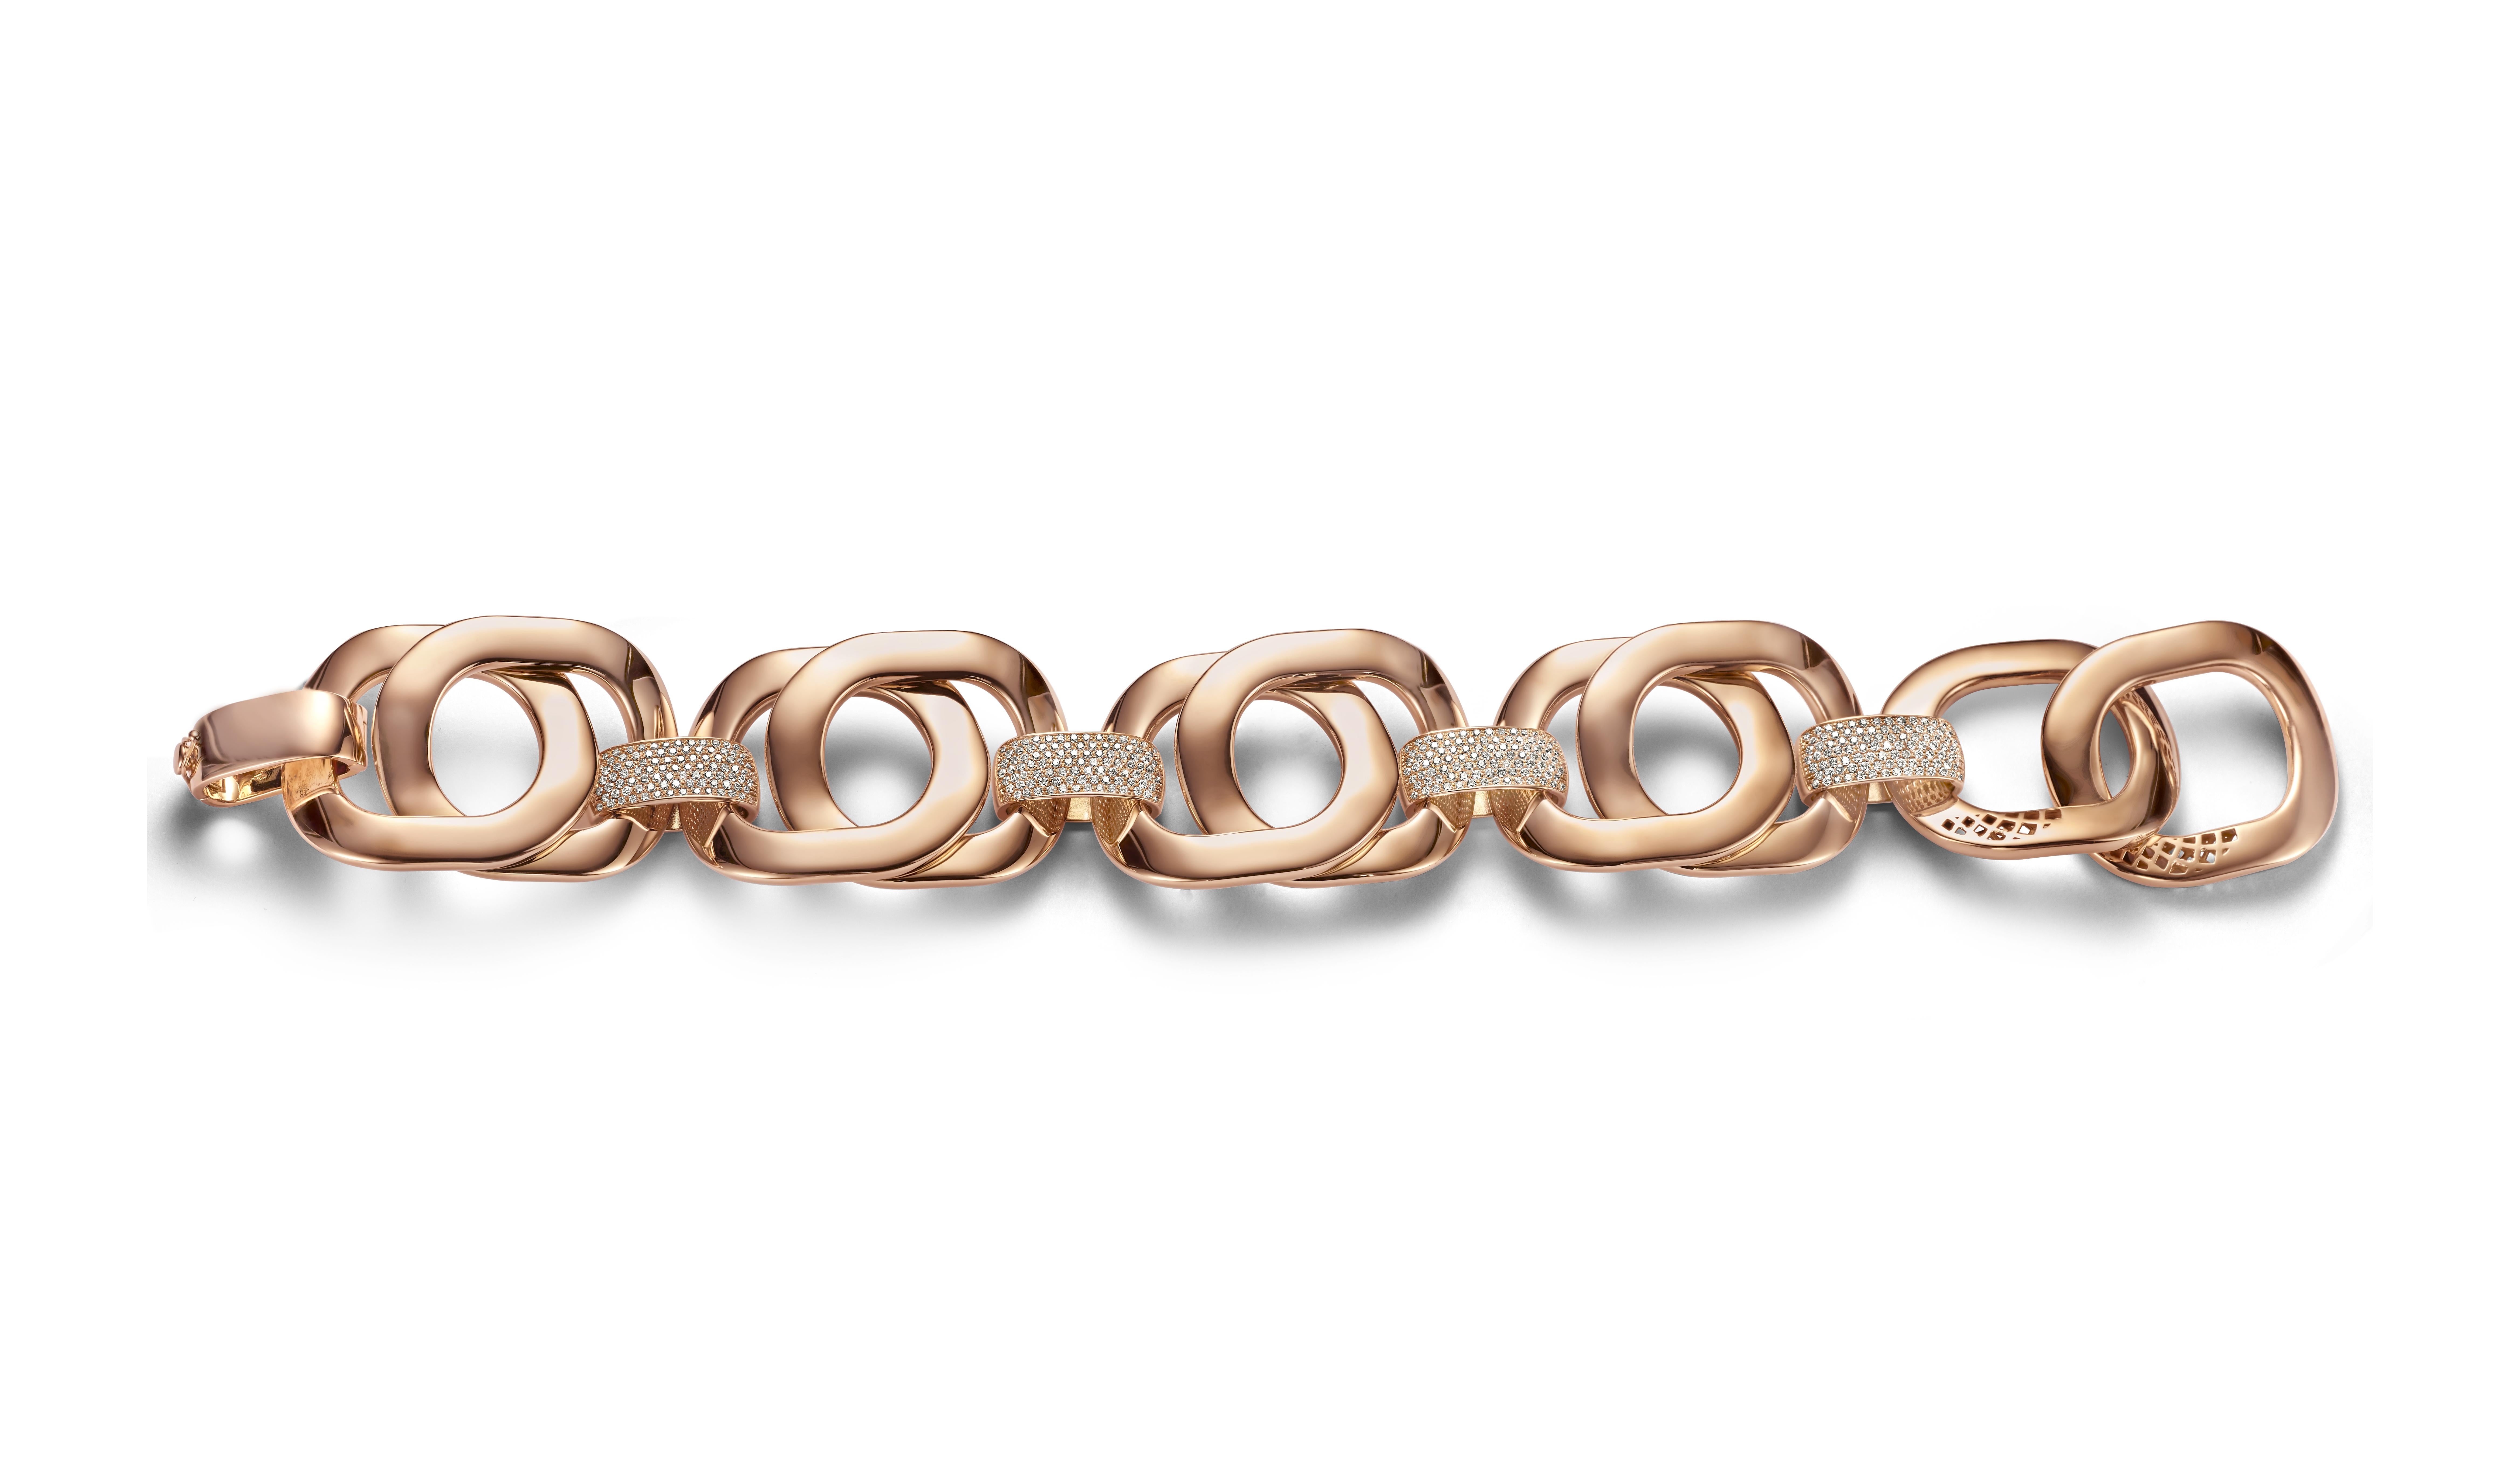 Stunning Massive 18 kt. rose gold Link / Chain Bracelet With 3.99 ct. Diamonds

Diamonds: Brilliant cut diamonds together 3.99 ct.

Material: 18 kt. rose gold

Measurements: Will max fit a 23 cm wrist 

Total weight: 91.8 gram / 3.215 oz / 58.9 dwt